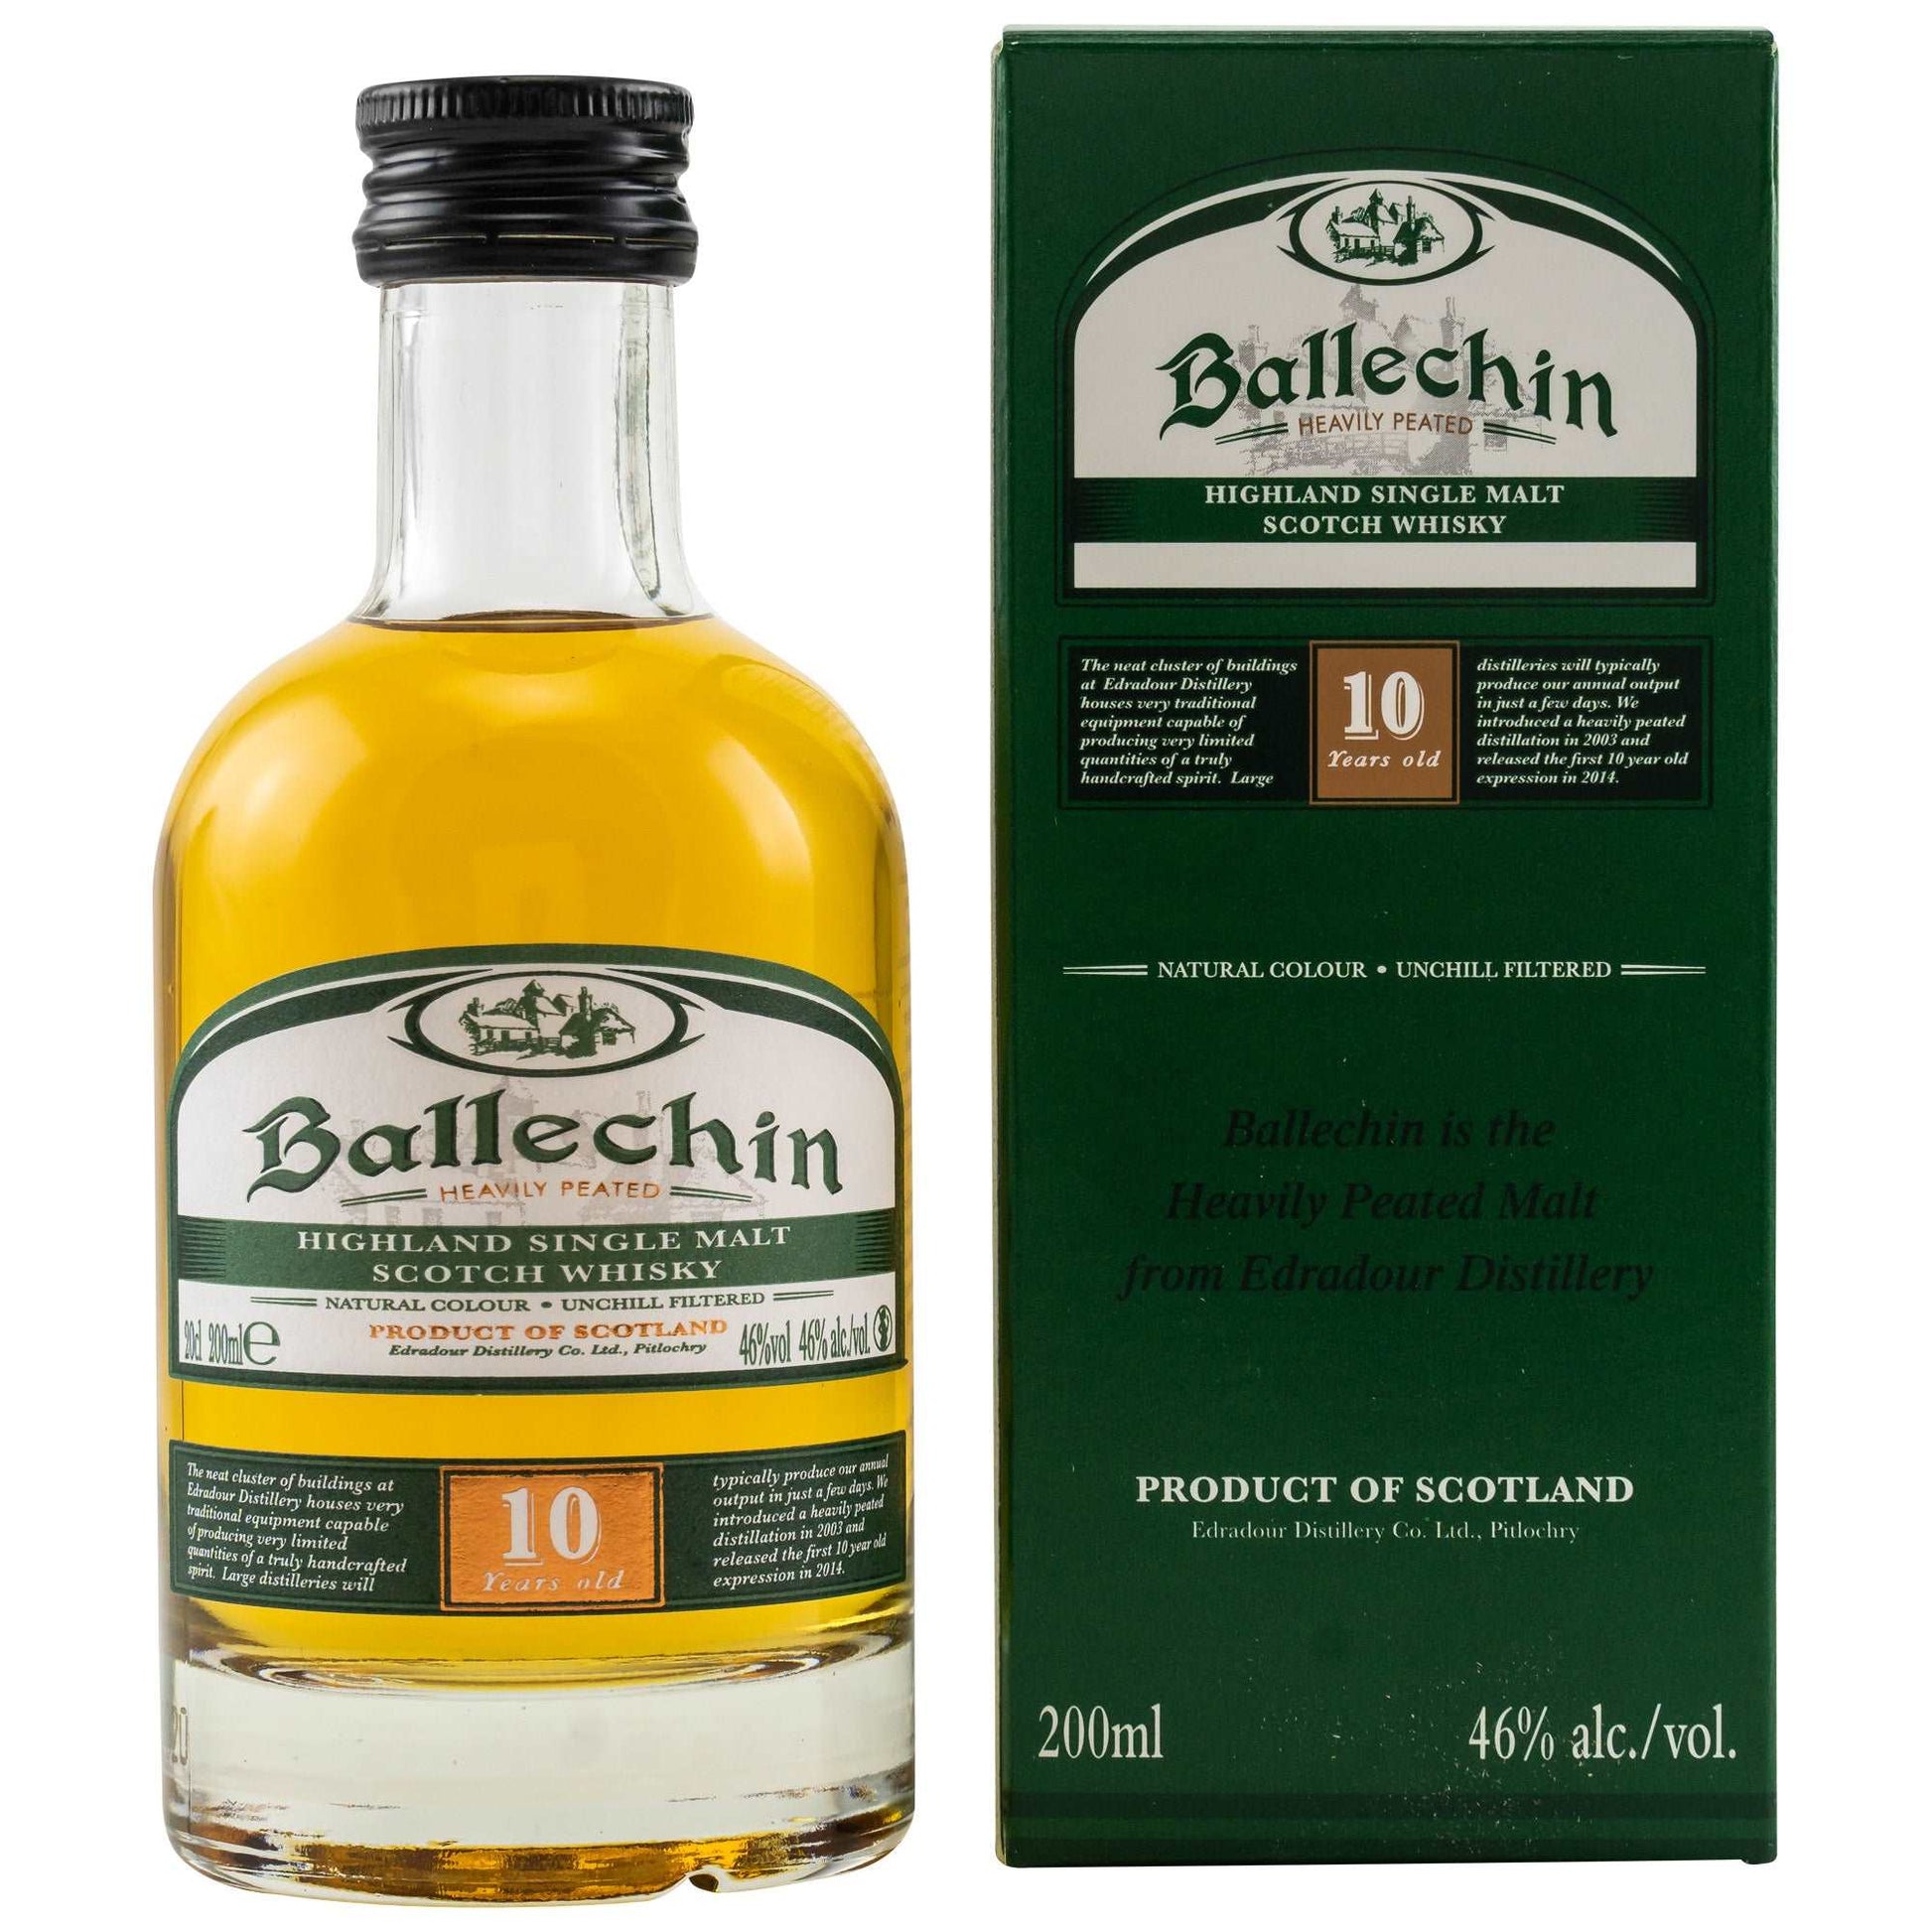 Ballechin | 10 Jahre | Heavily Peated | 0,2l | 46%GET A BOTTLE